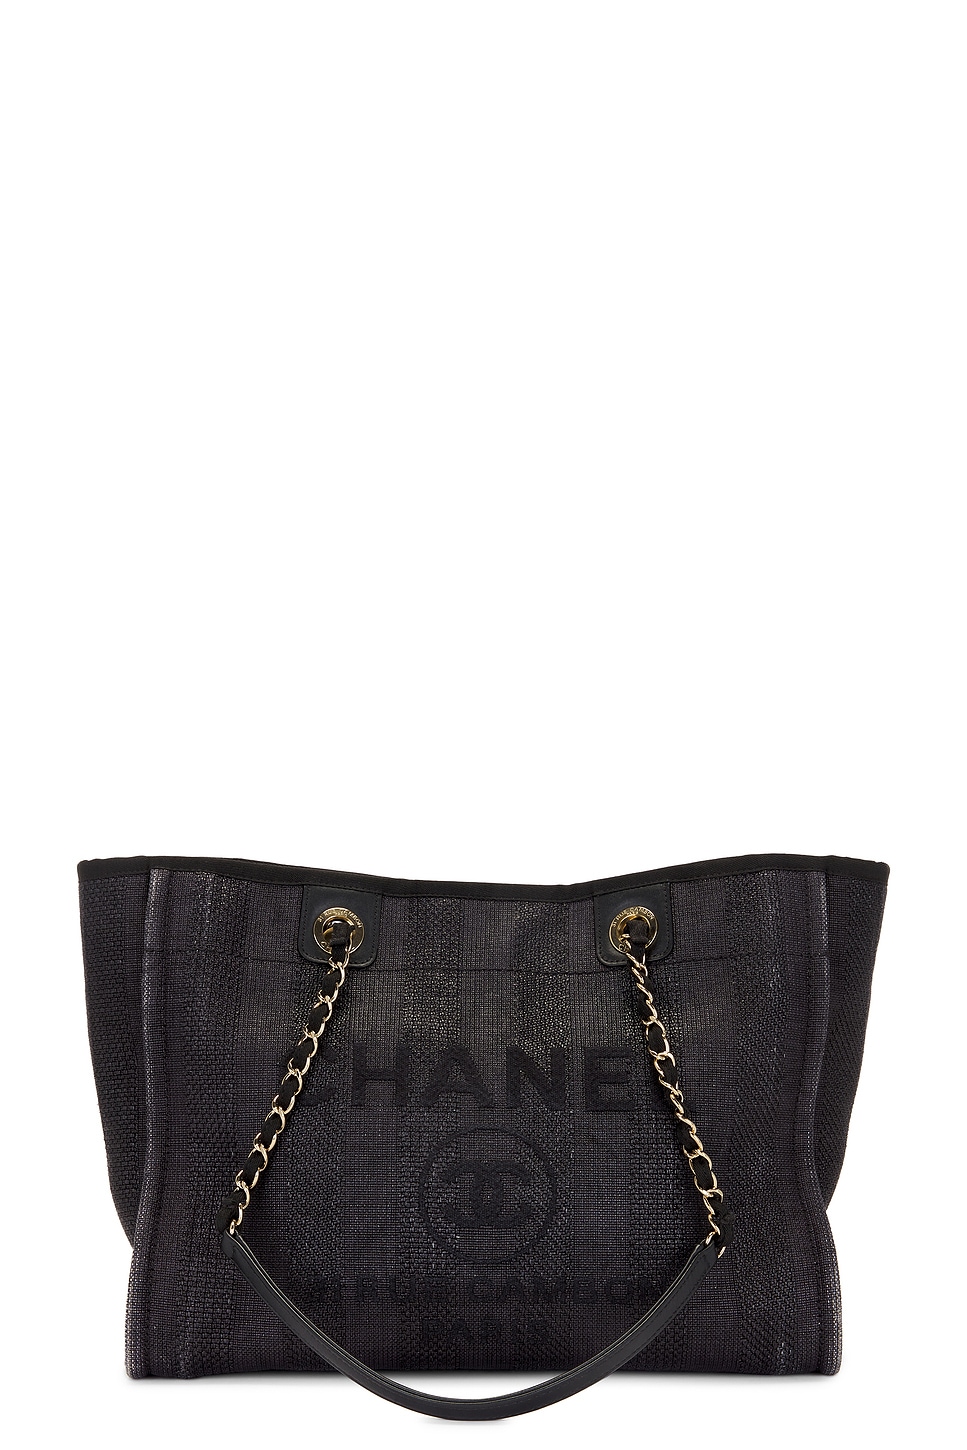 Pre-owned Chanel Deauville Mm Straw Tote Bag In Black